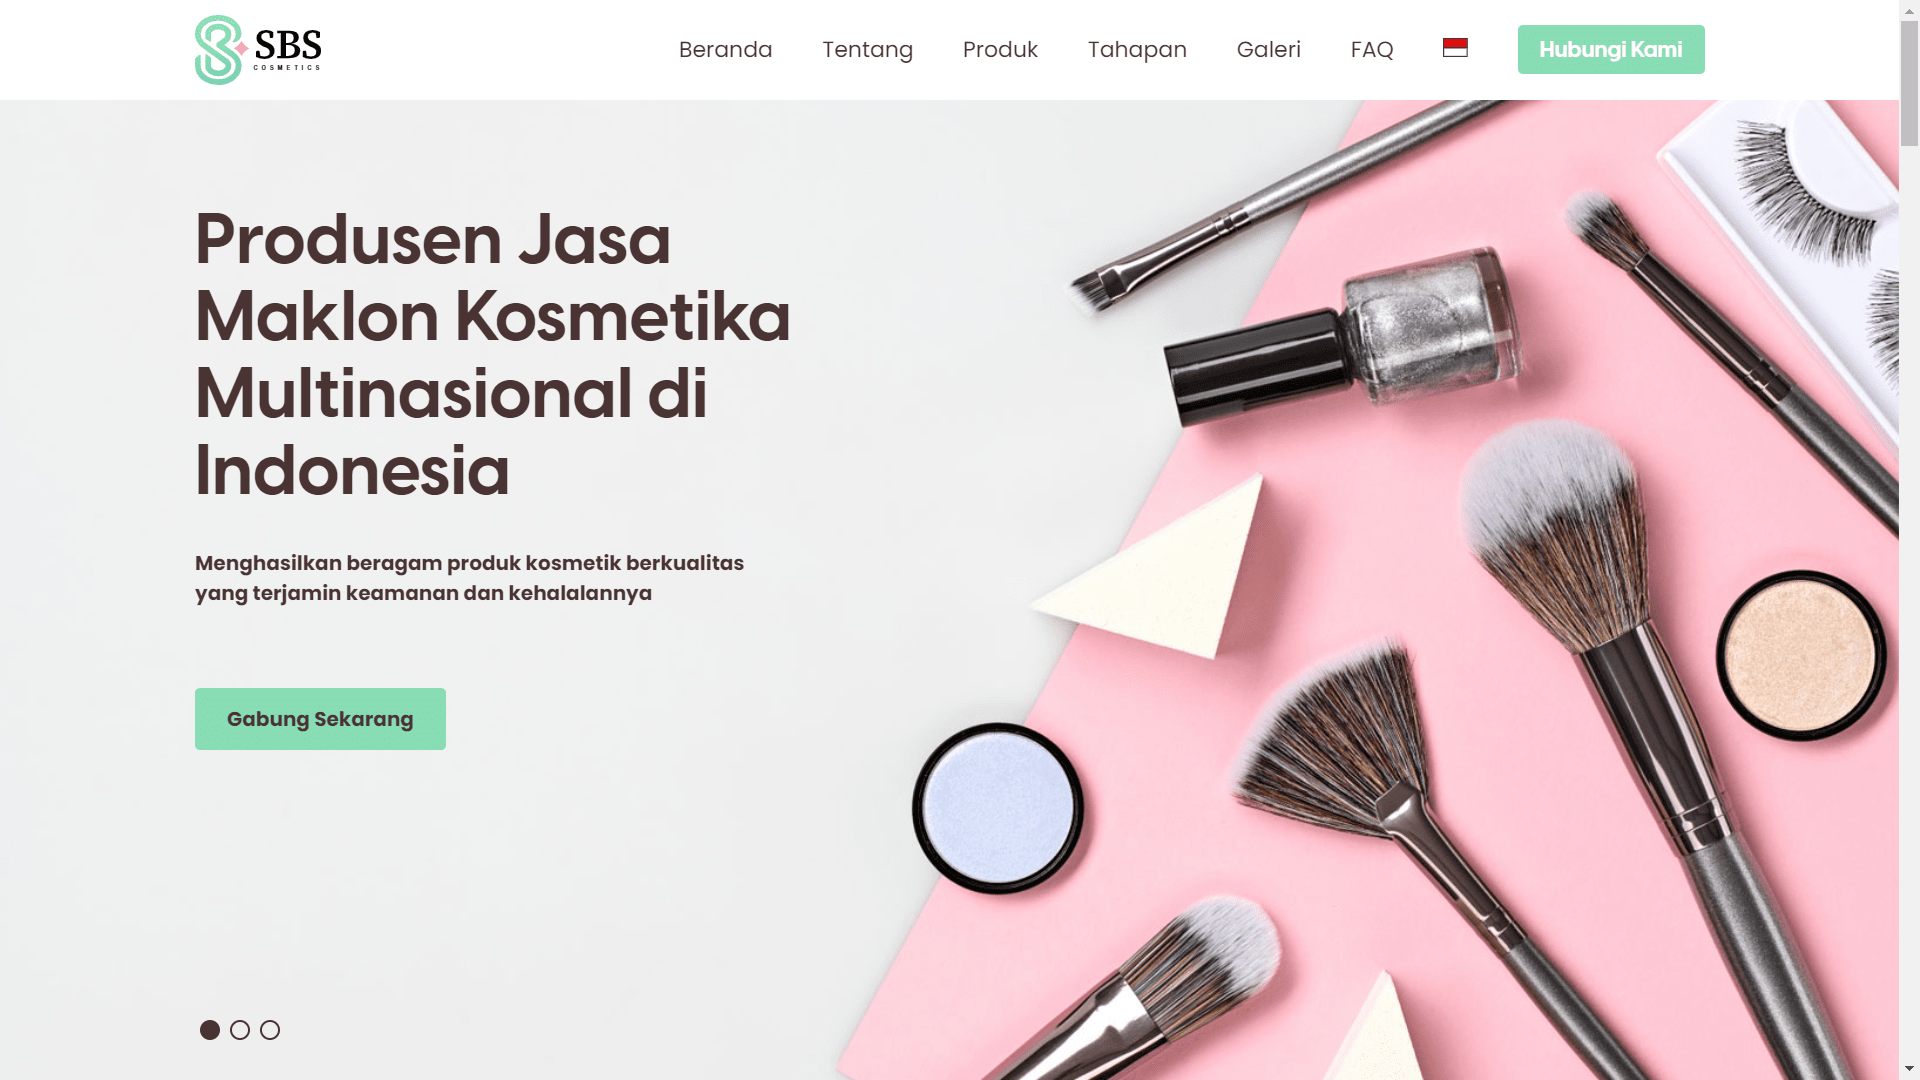 A company profile website, SBS Cosmetics is a multinational cosmetics contract manufacturer in Indonesia